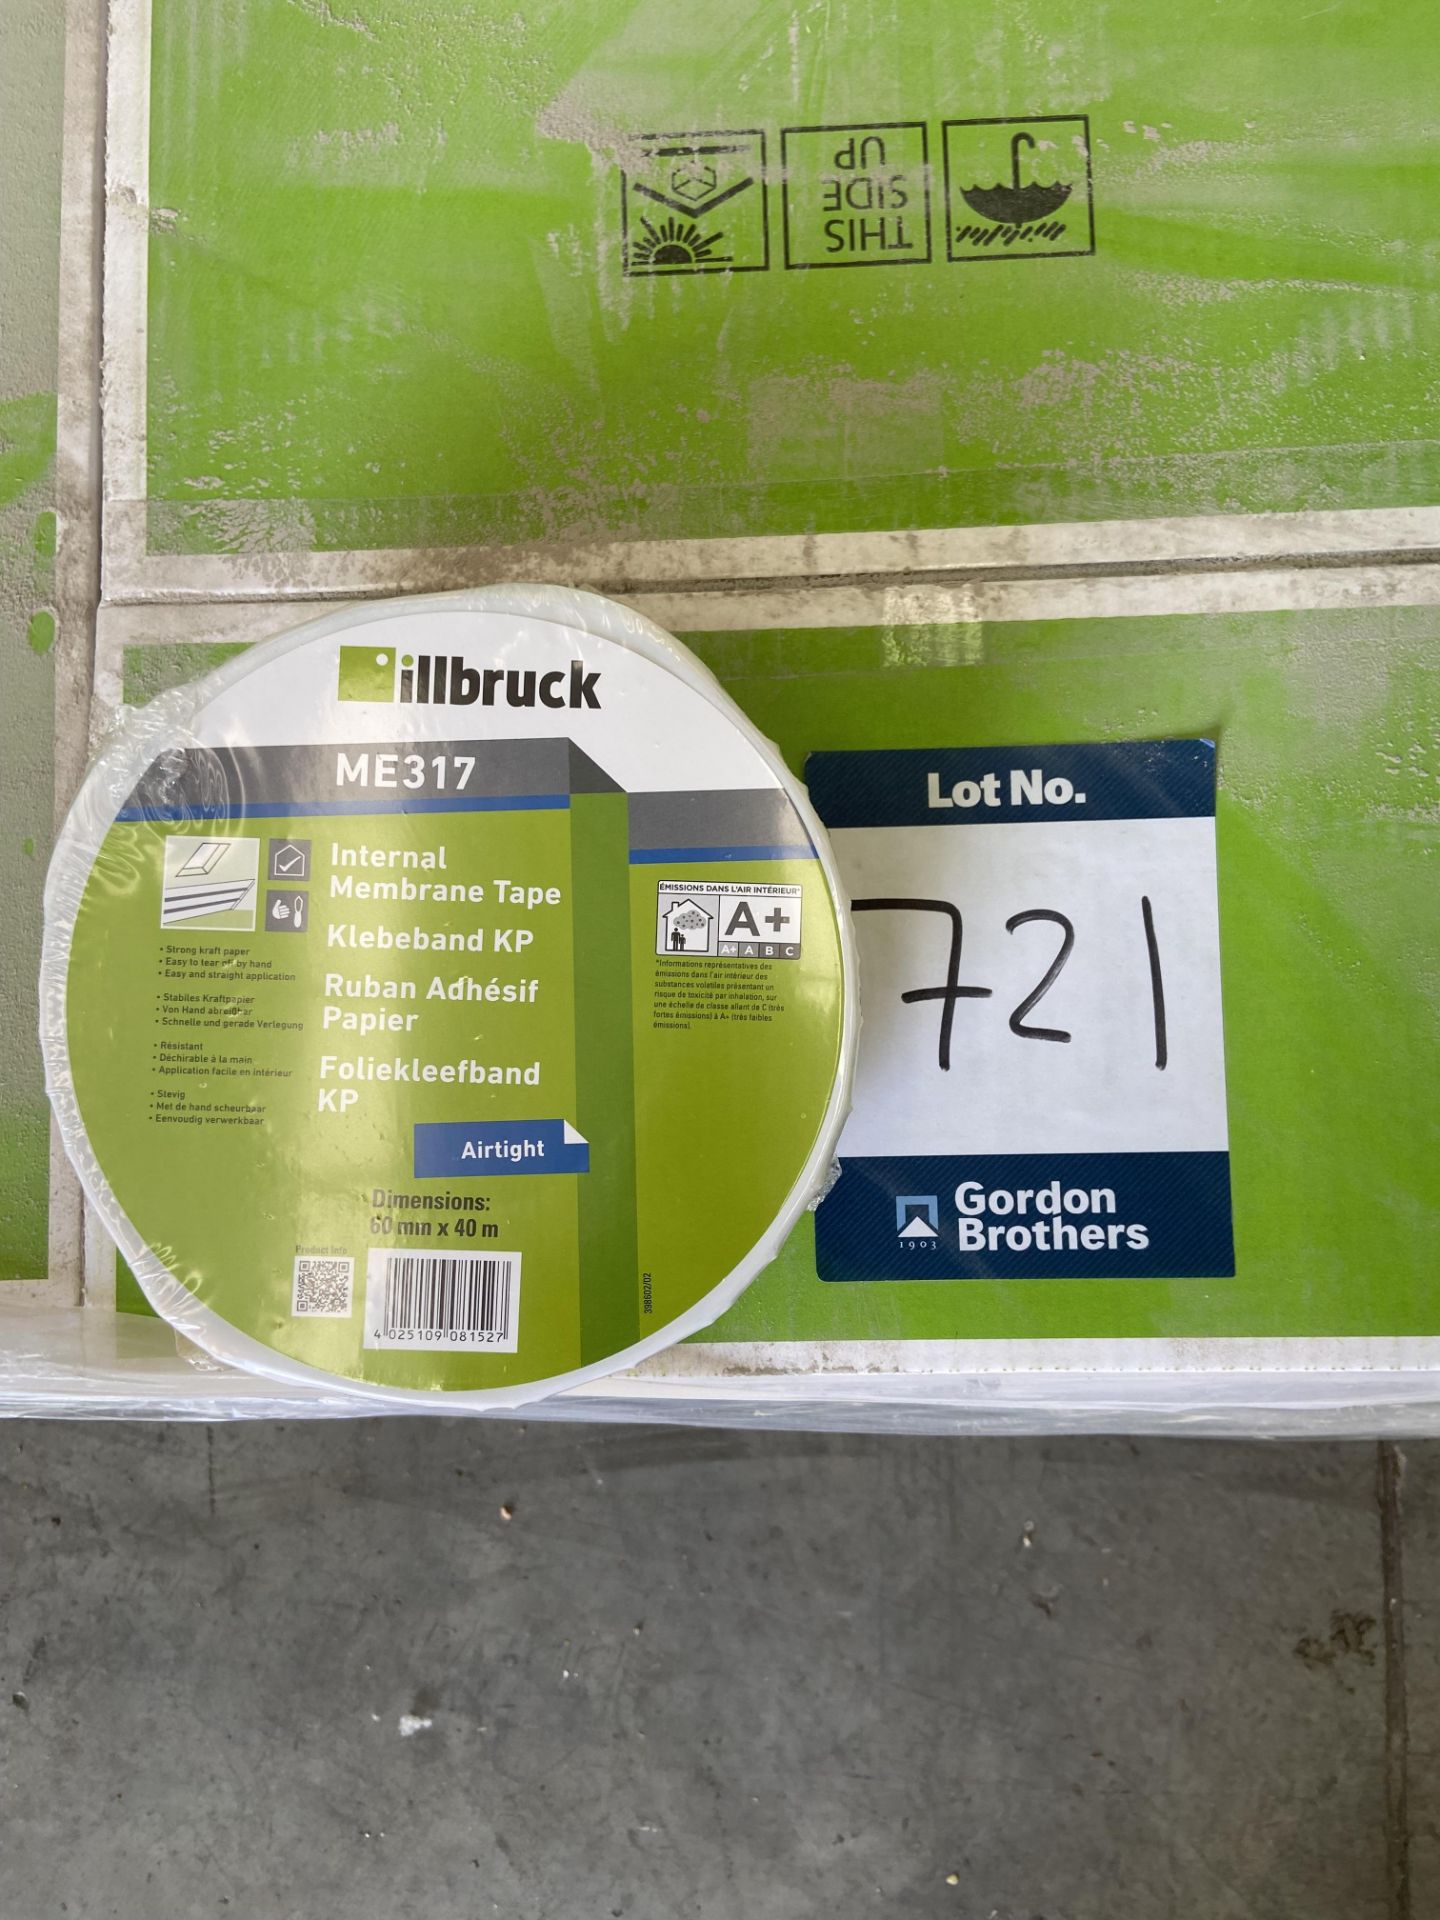 Illbruck ME317 internal membrane tape pallet pf 6 boxes with 8 rolls per box - Image 3 of 3